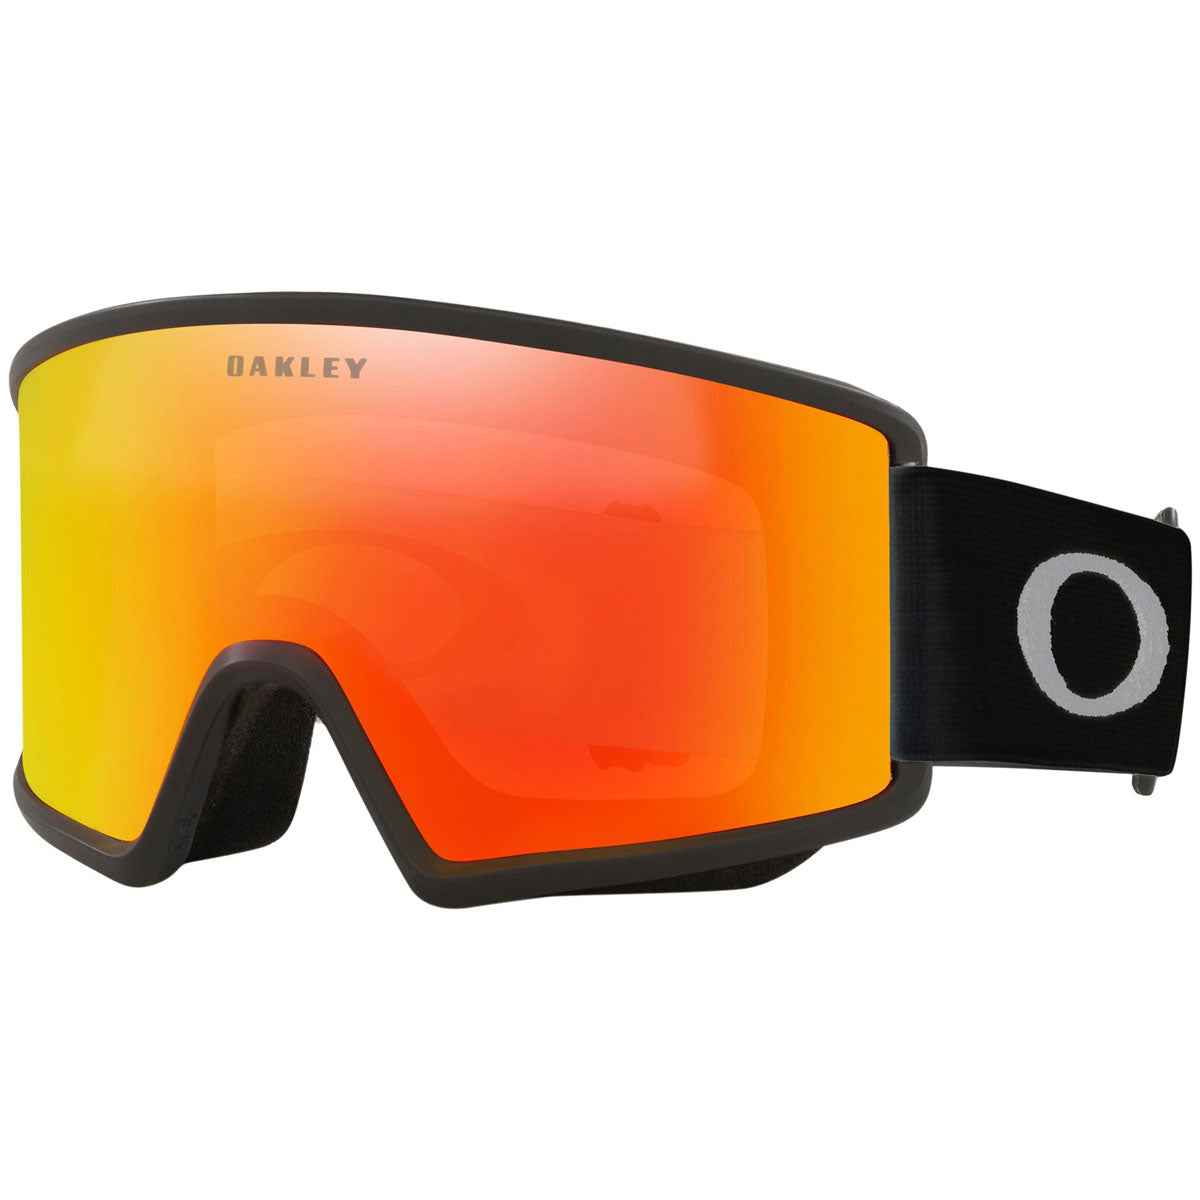 Oakley Target Line M Snowboard Goggles - Black/Fire/Persimmon image 1